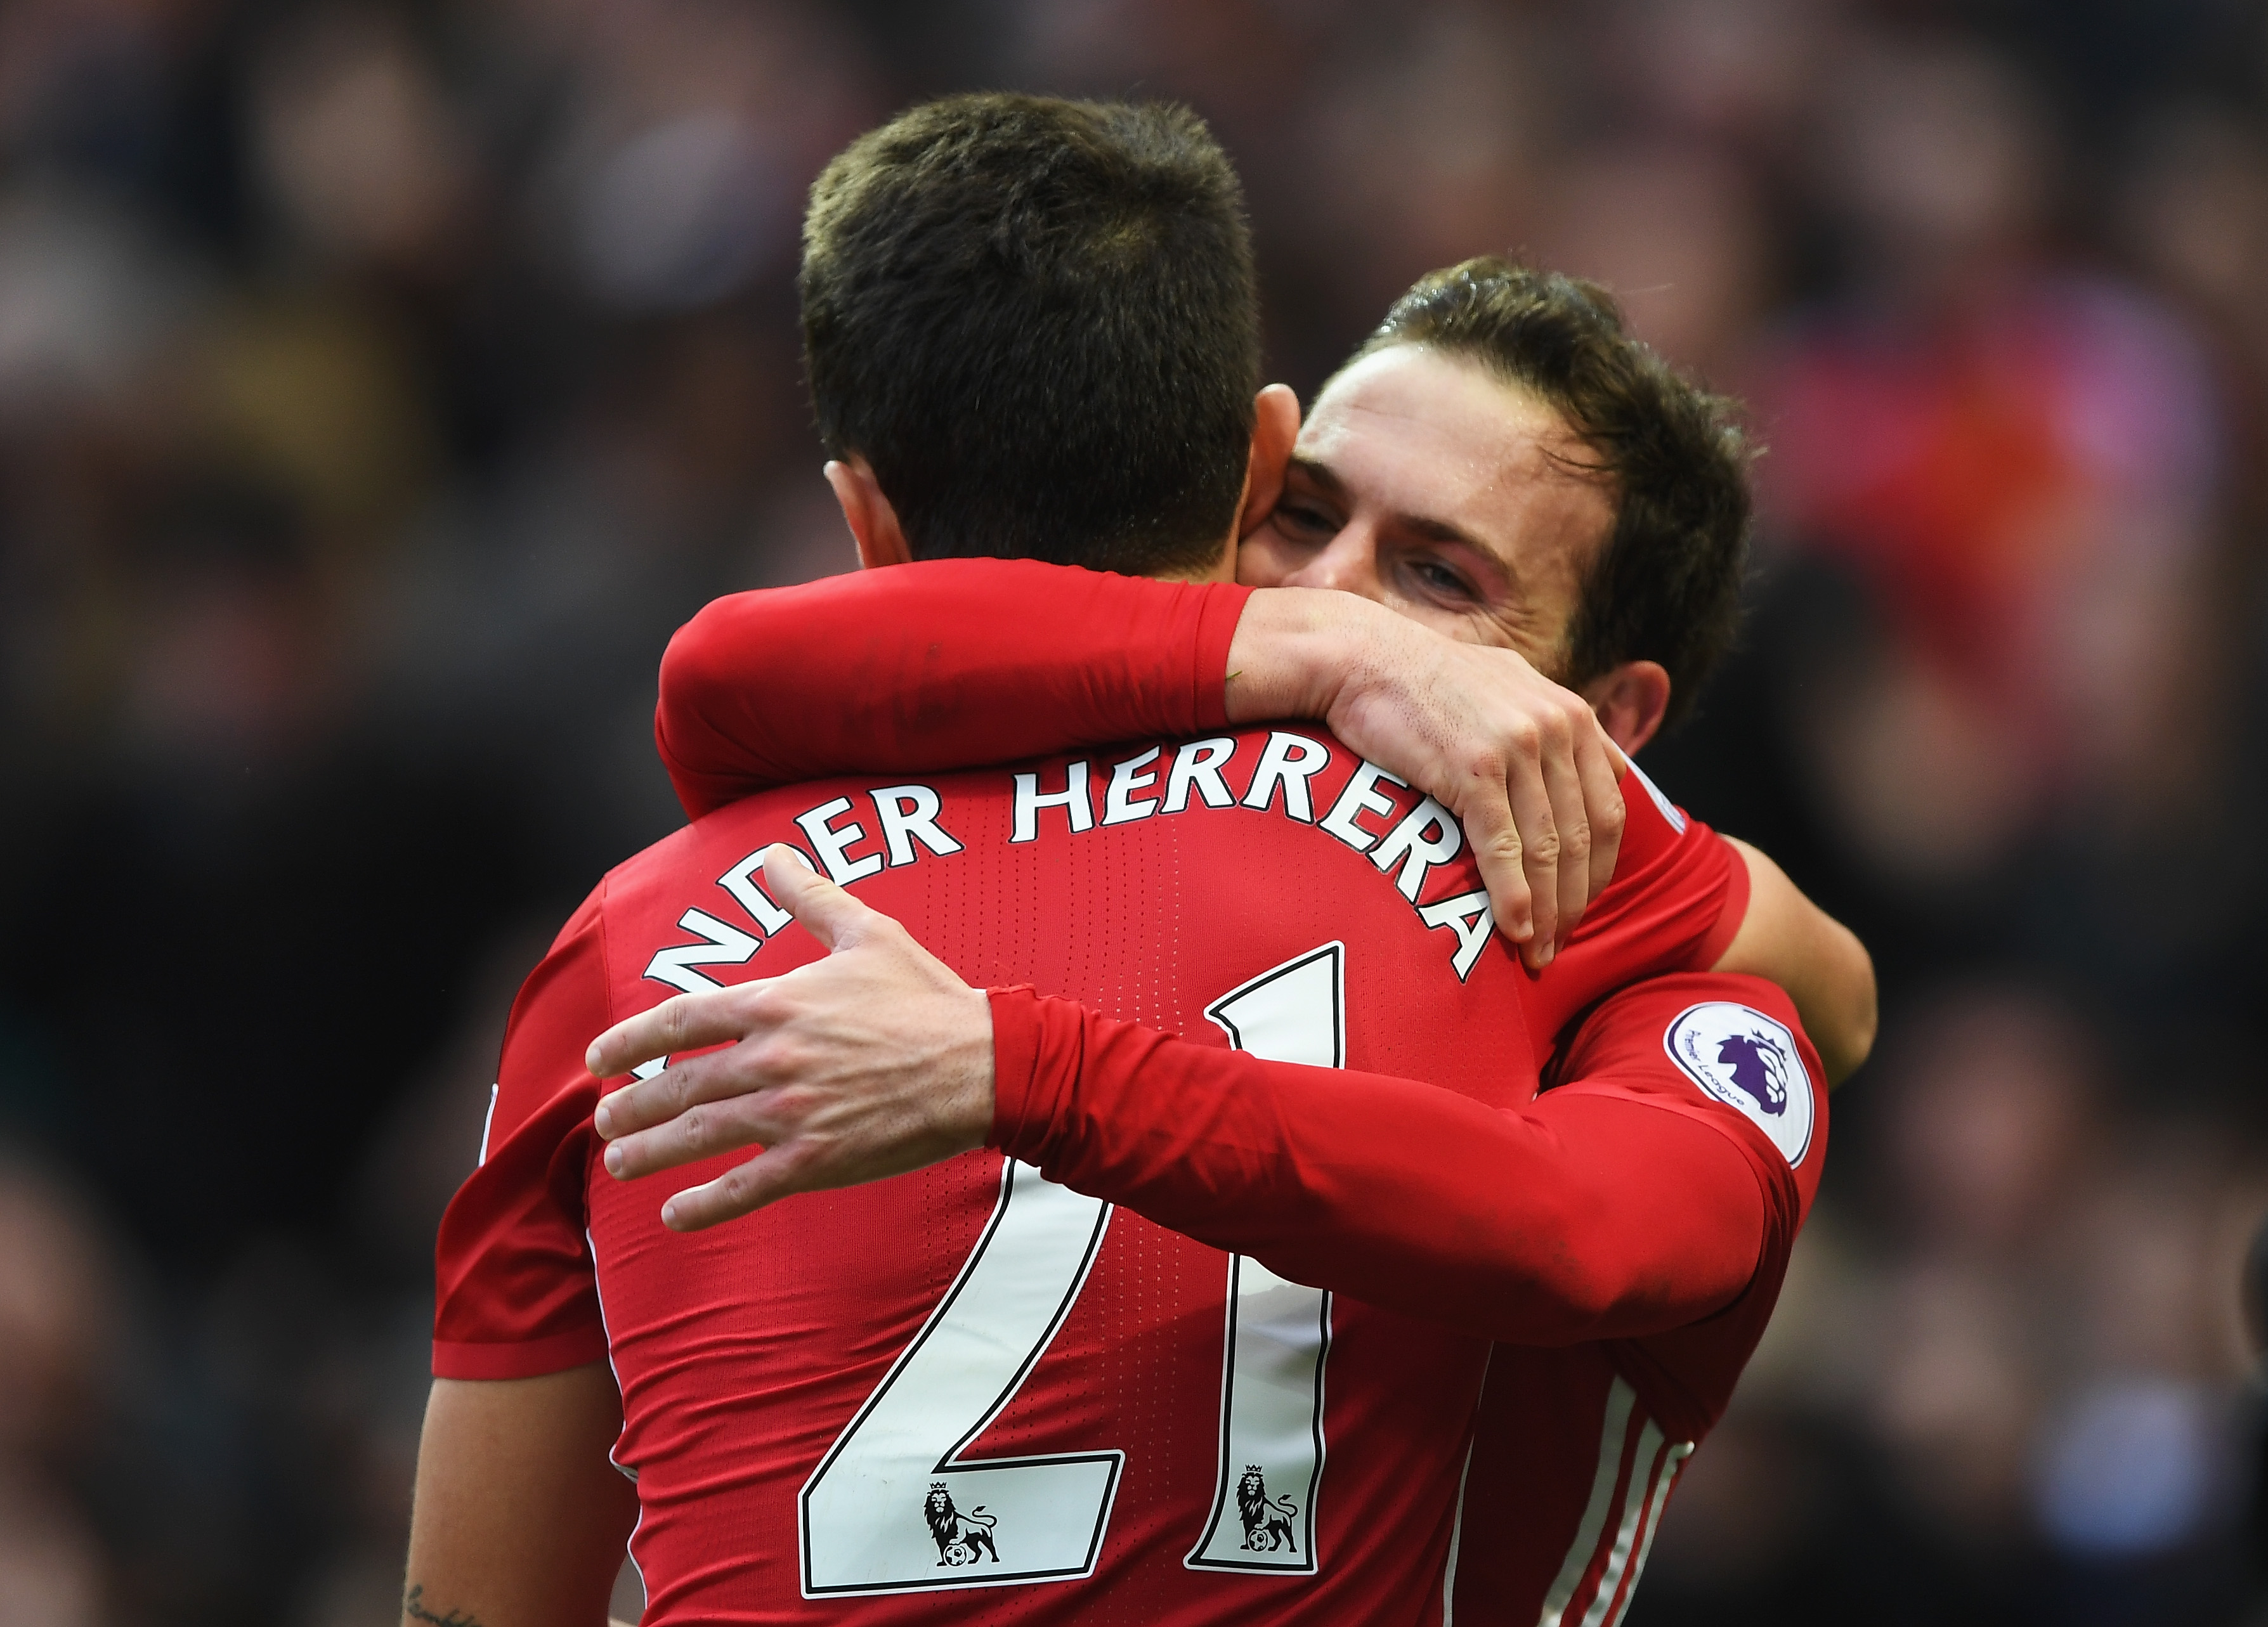 MANCHESTER, ENGLAND - NOVEMBER 19:  Juan Mata of Manchester United celebrates scoring his sides first goal with Ander Herrera of Manchester United during the Premier League match between Manchester United and Arsenal at Old Trafford on November 19, 2016 in Manchester, England.  (Photo by Shaun Botterill/Getty Images)